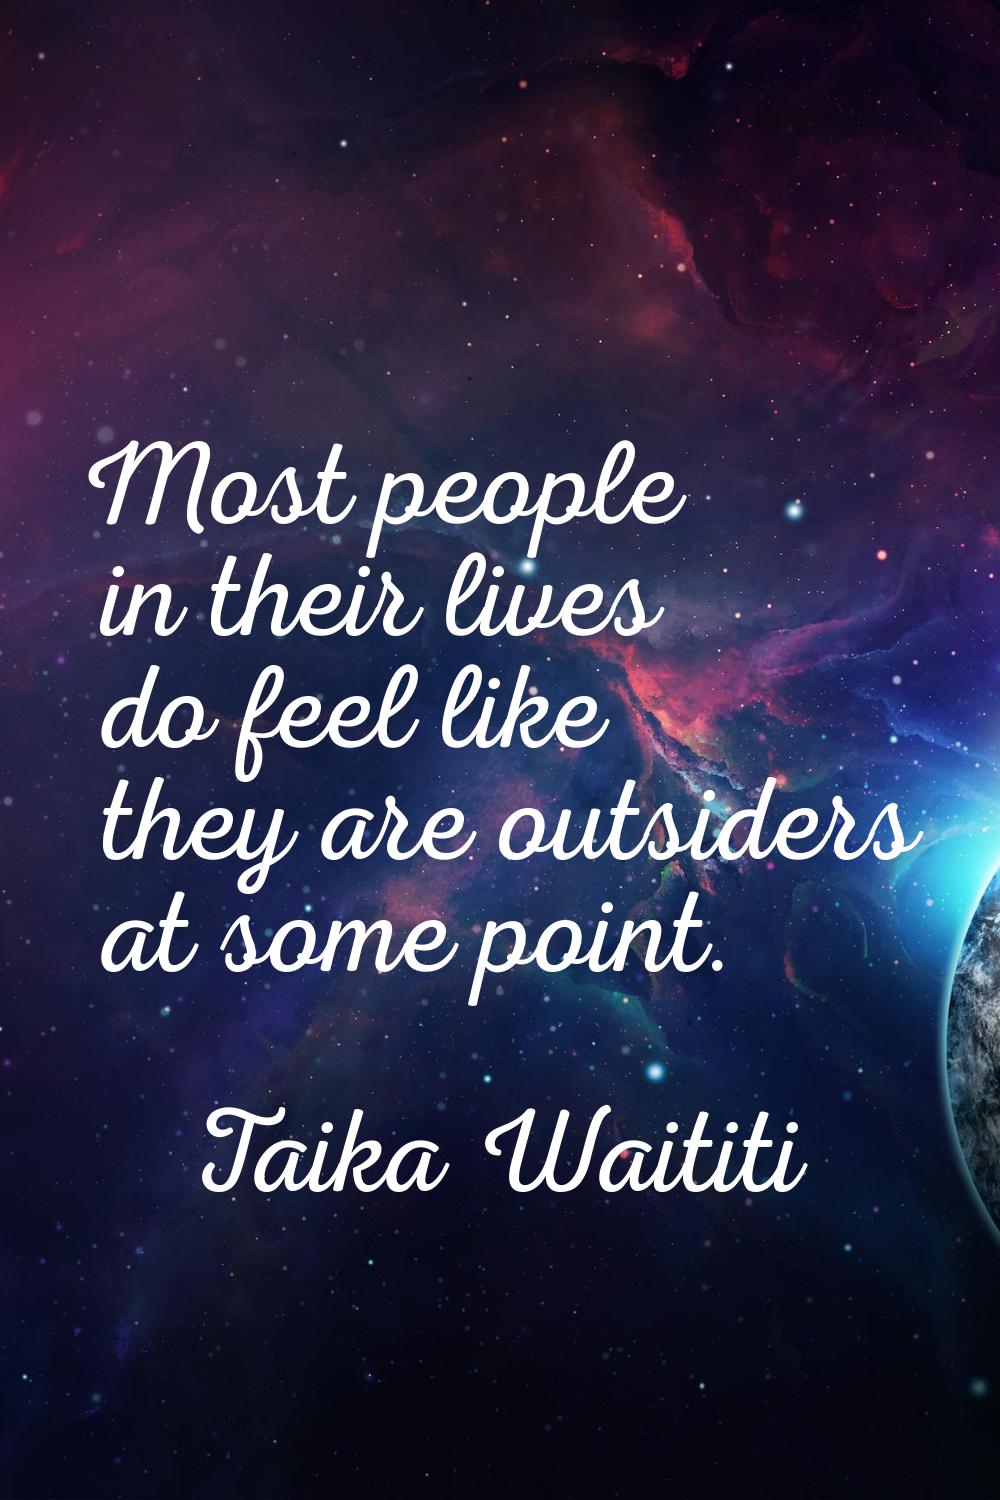 Most people in their lives do feel like they are outsiders at some point.